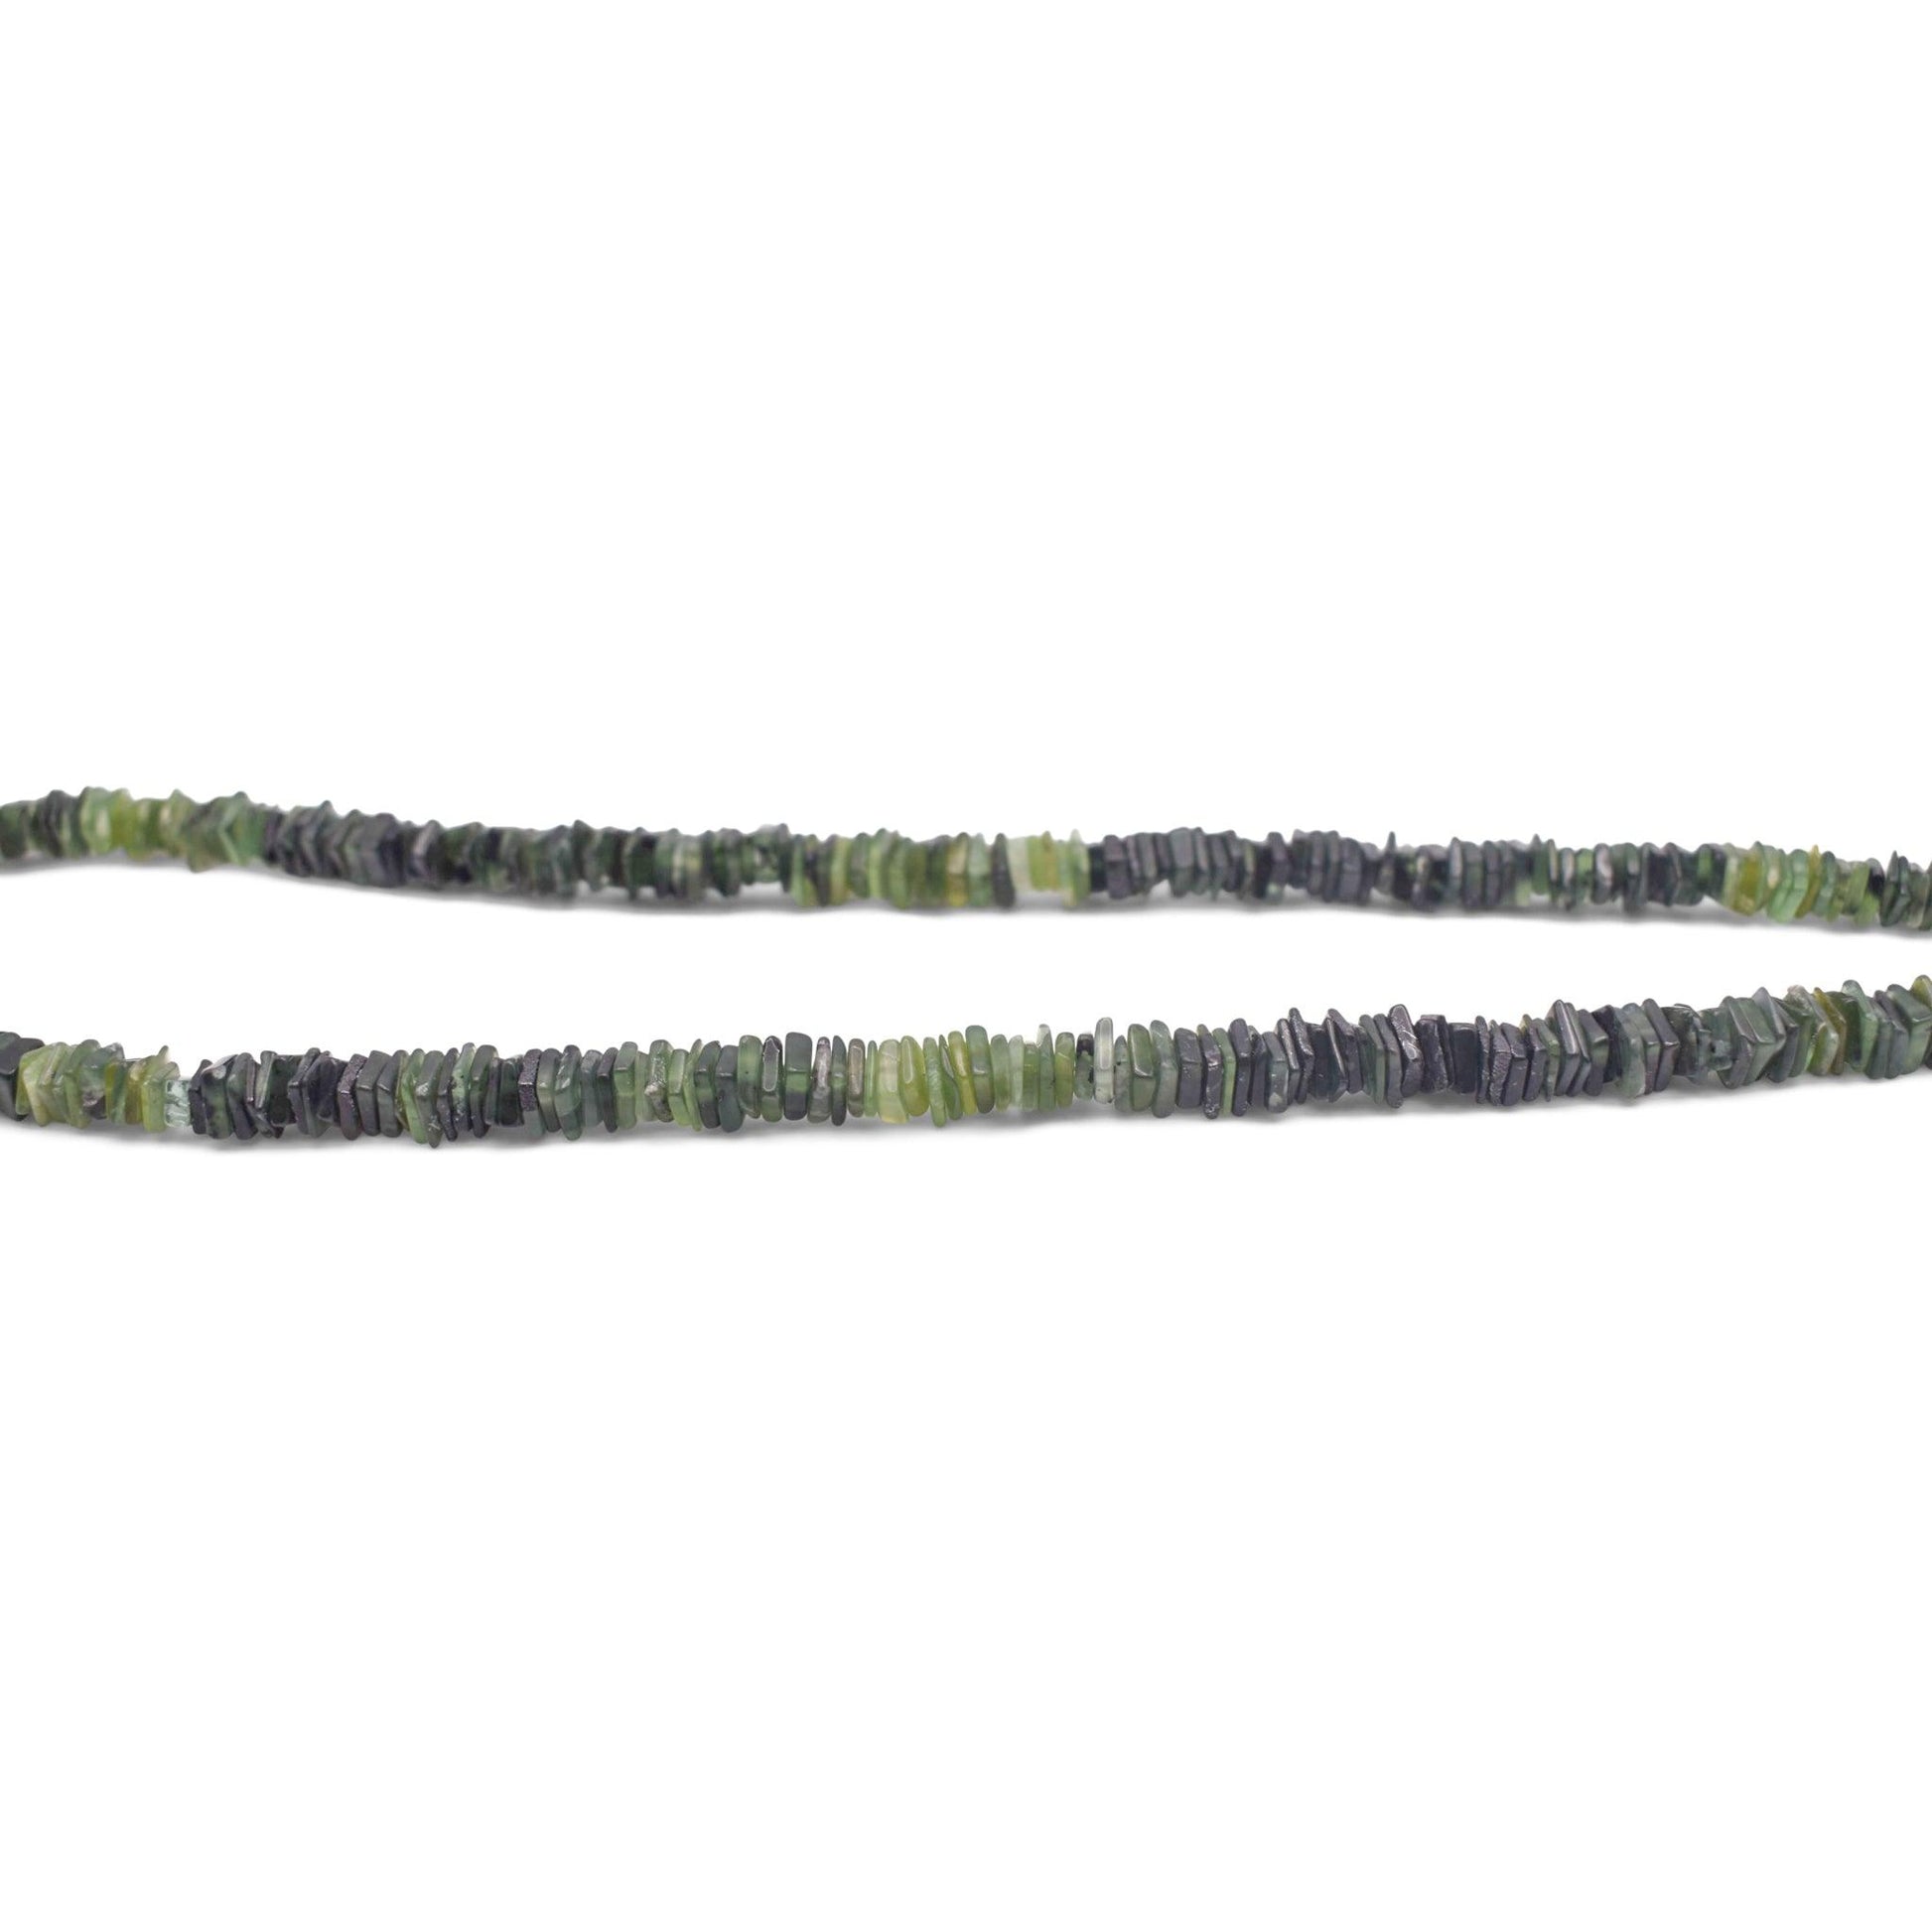 Serpentine-Heishi-Beads green and black color beads with white background